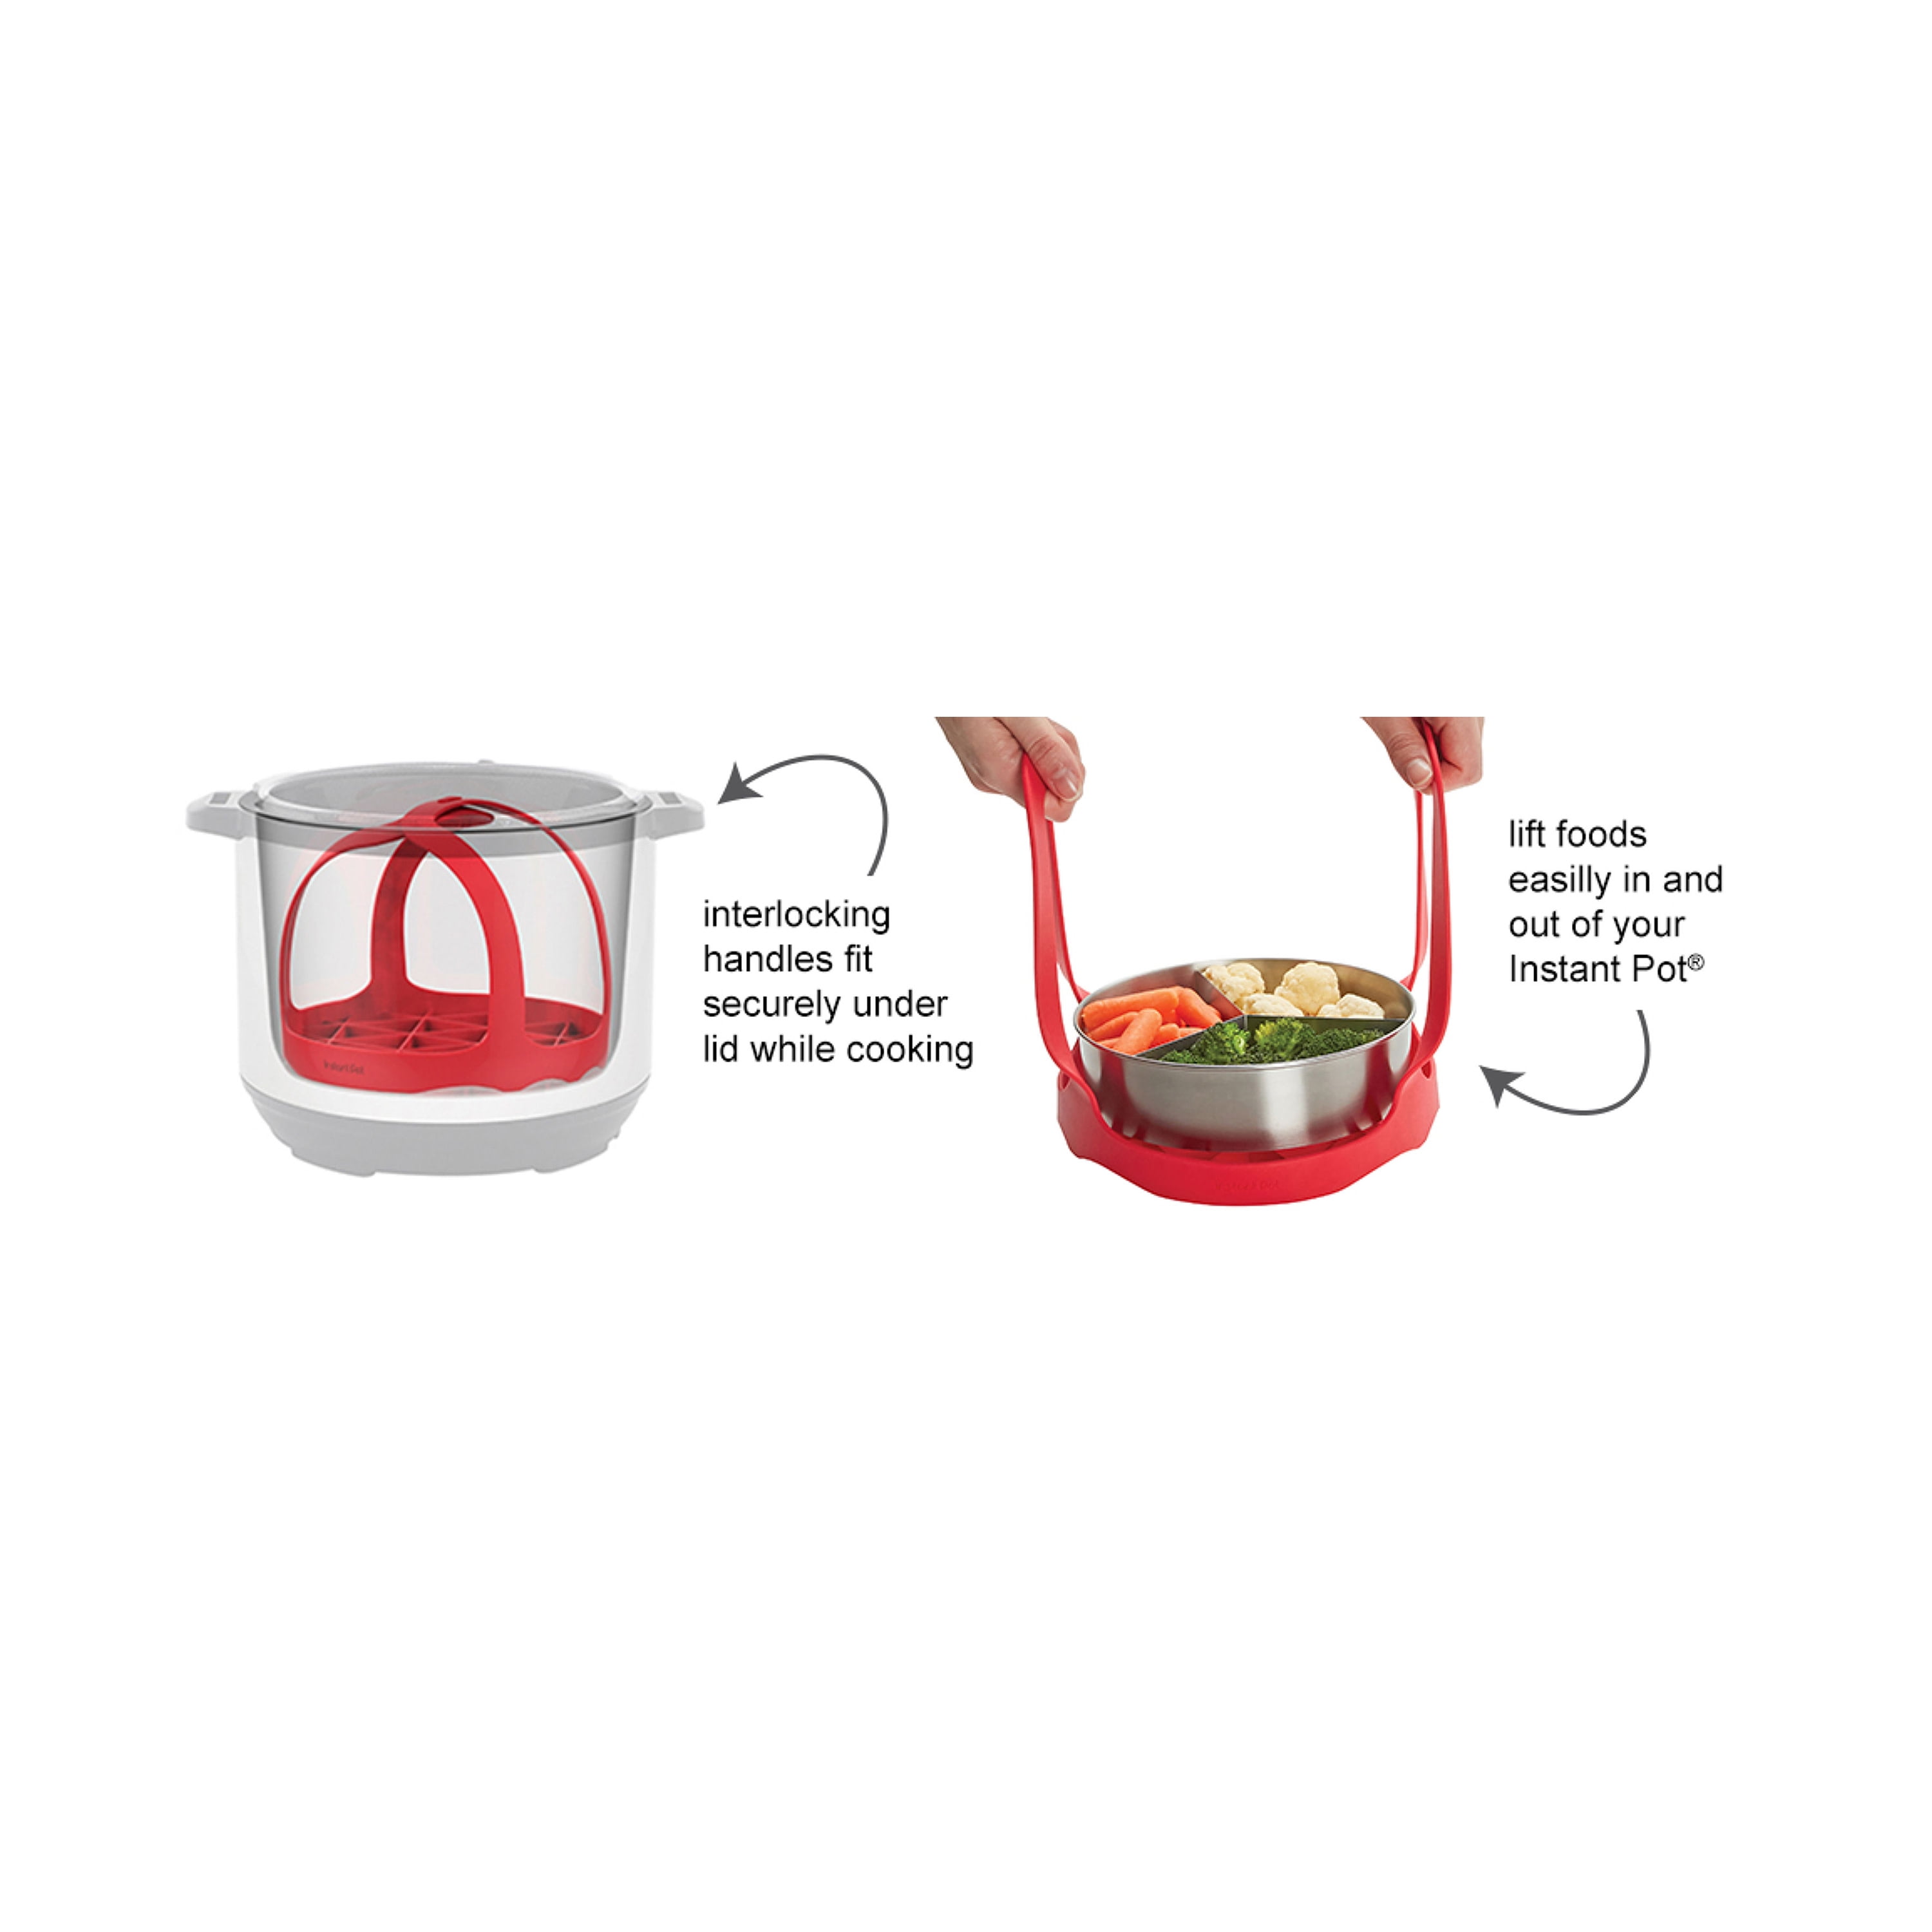 ddLUCK Pressure Cooker Sling,silicone Bakeware Sling for 6 Qt/8 qt Instant Pot, Ninja Foodi and Multi-function Cooker Anti-scalding Bakeware Lifter